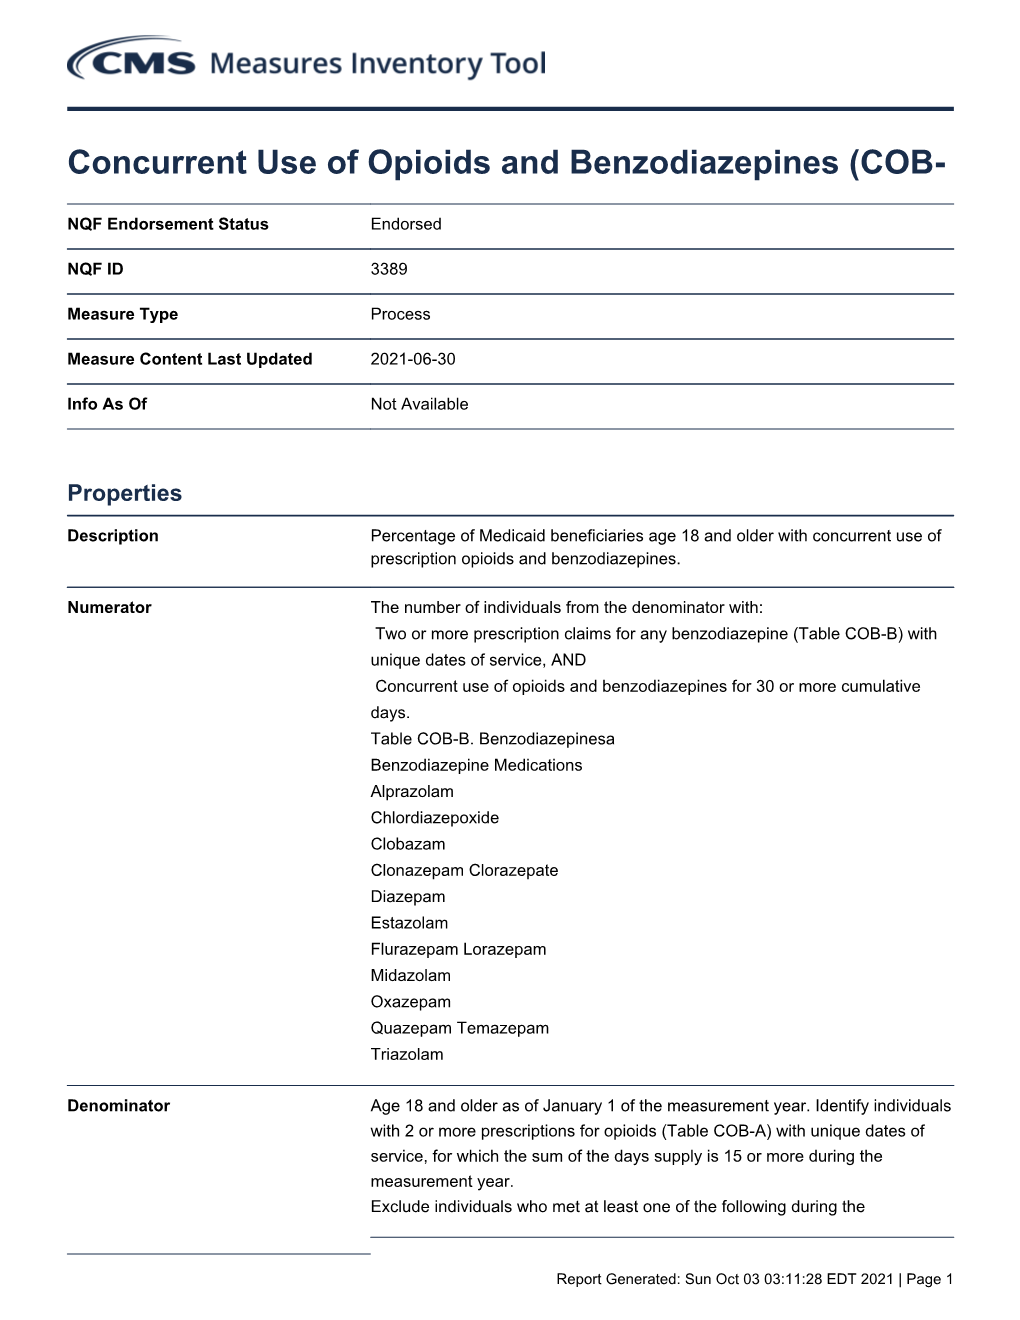 Concurrent Use of Opioids and Benzodiazepines (COB